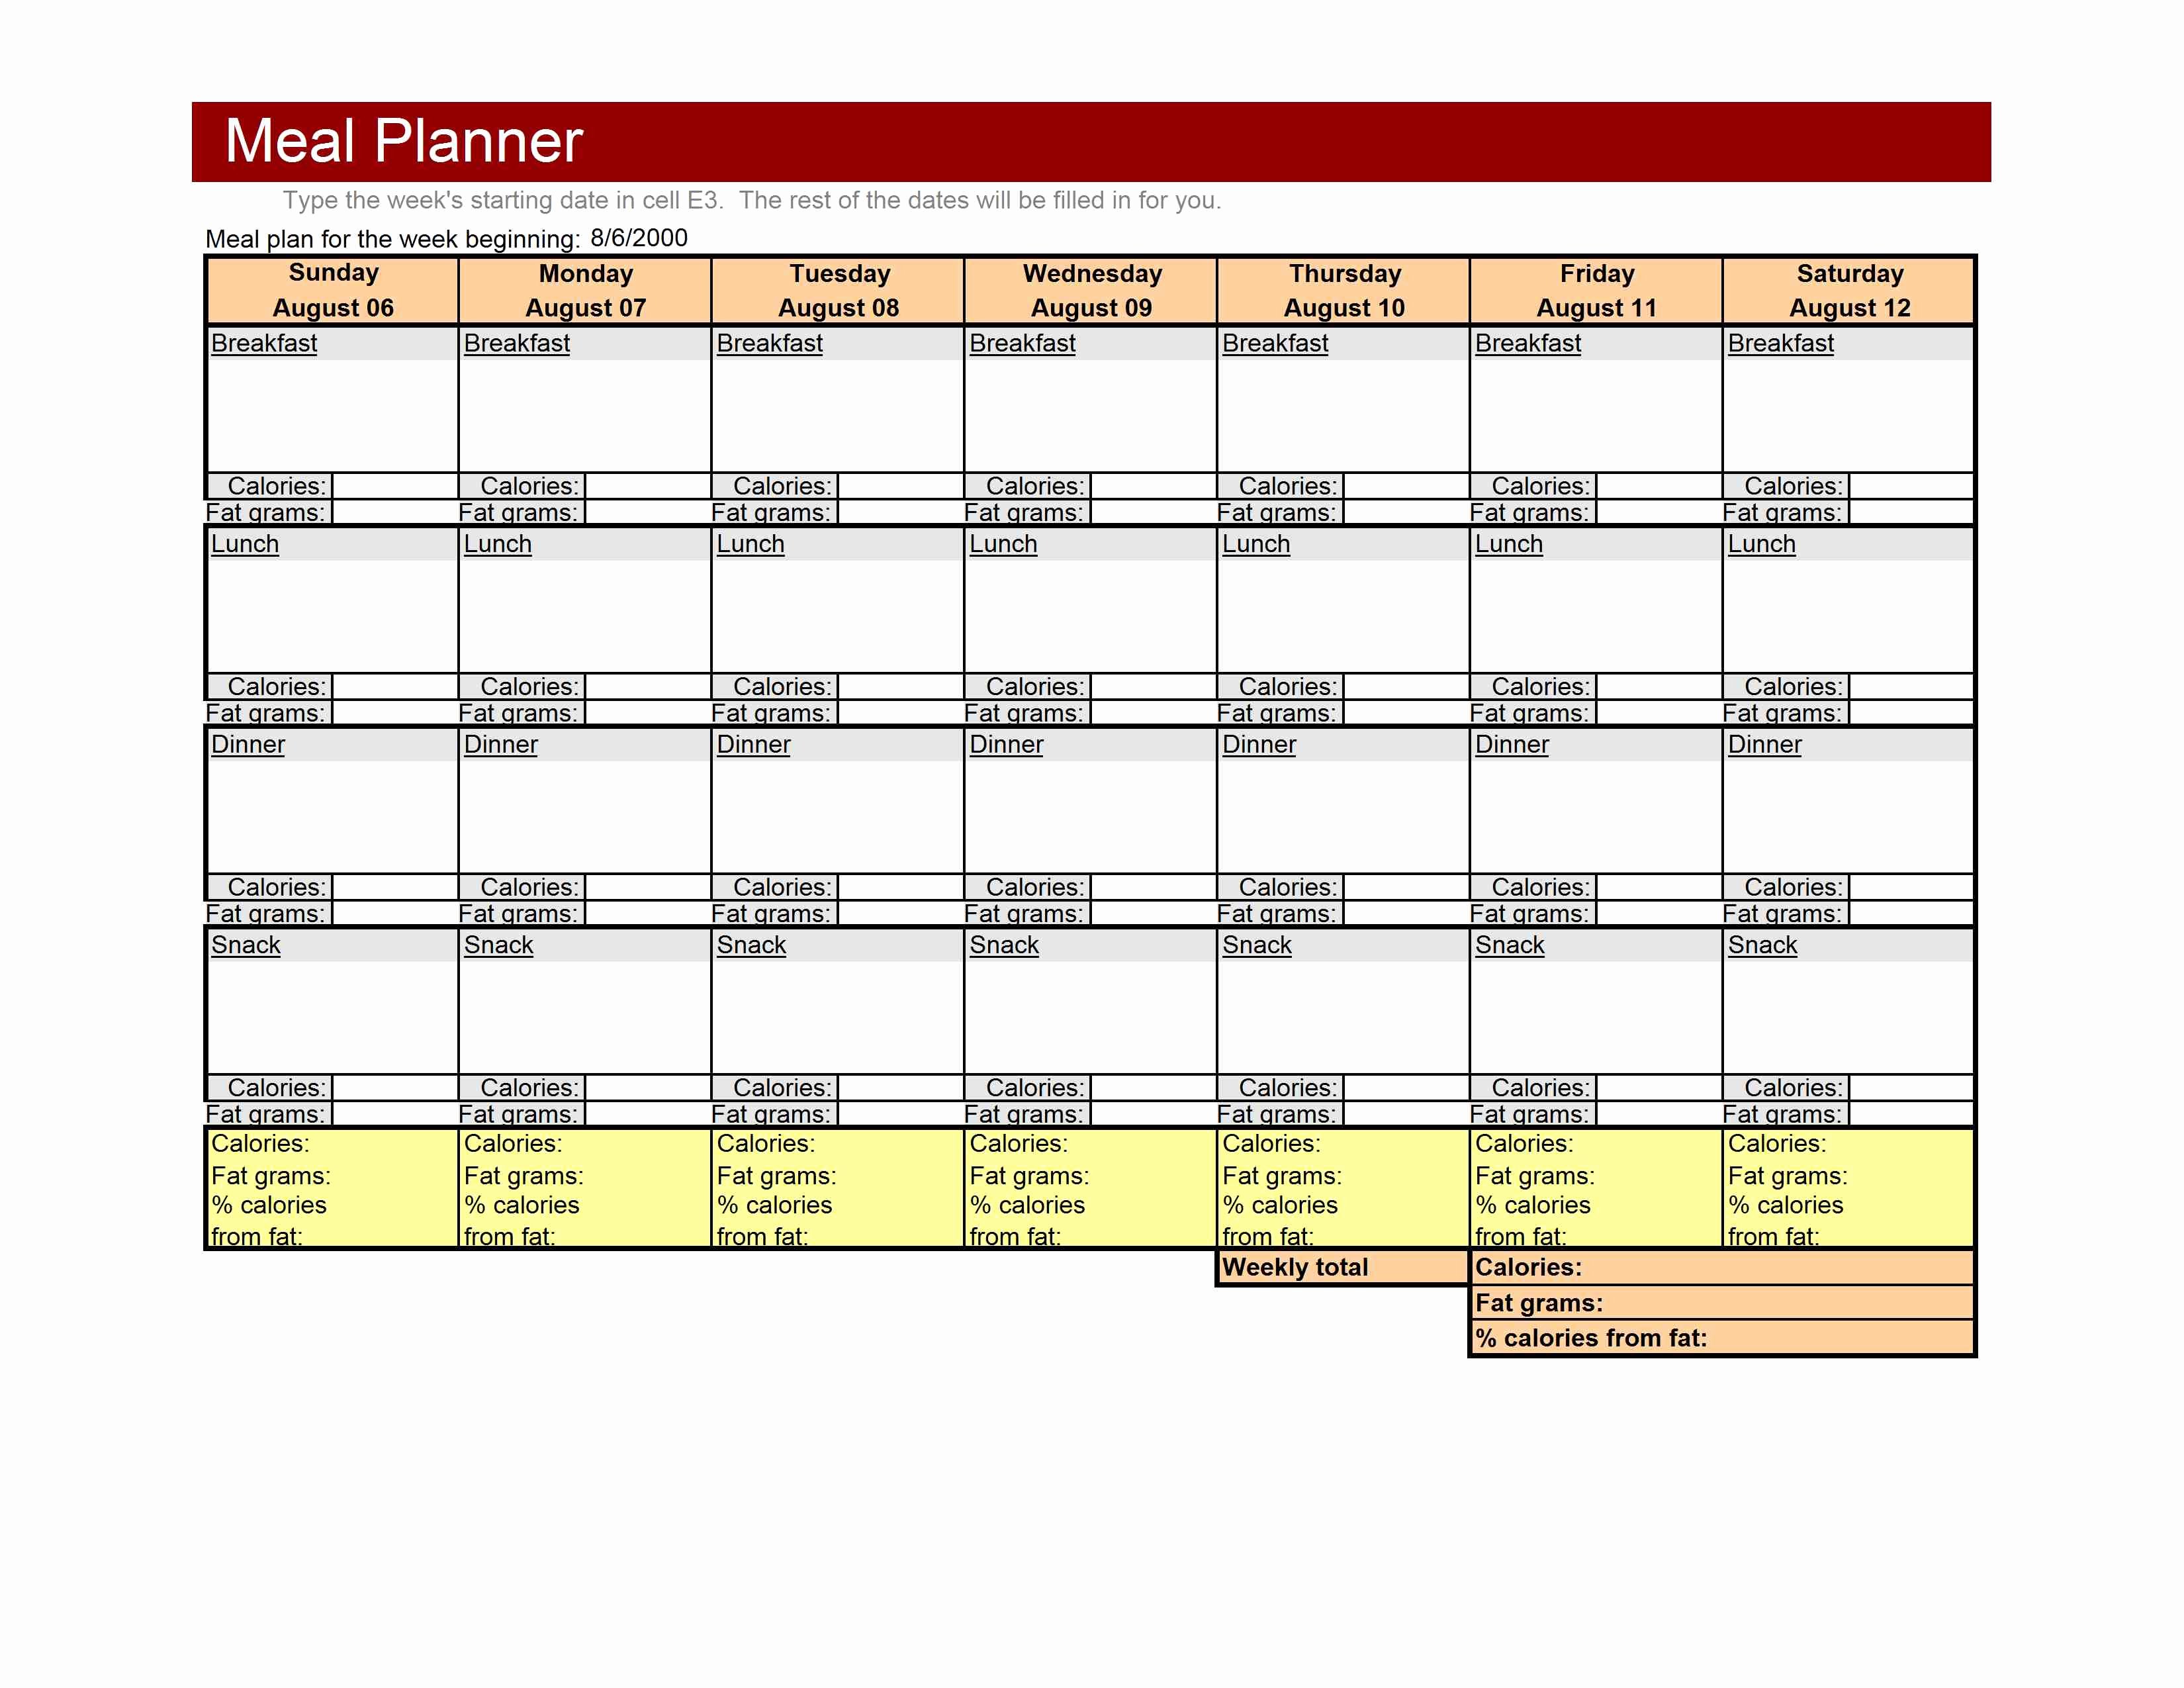 Meal Plan Template Excel Awesome 86 Weekly Meal Planner 1024x791 Weekly Meal Planner